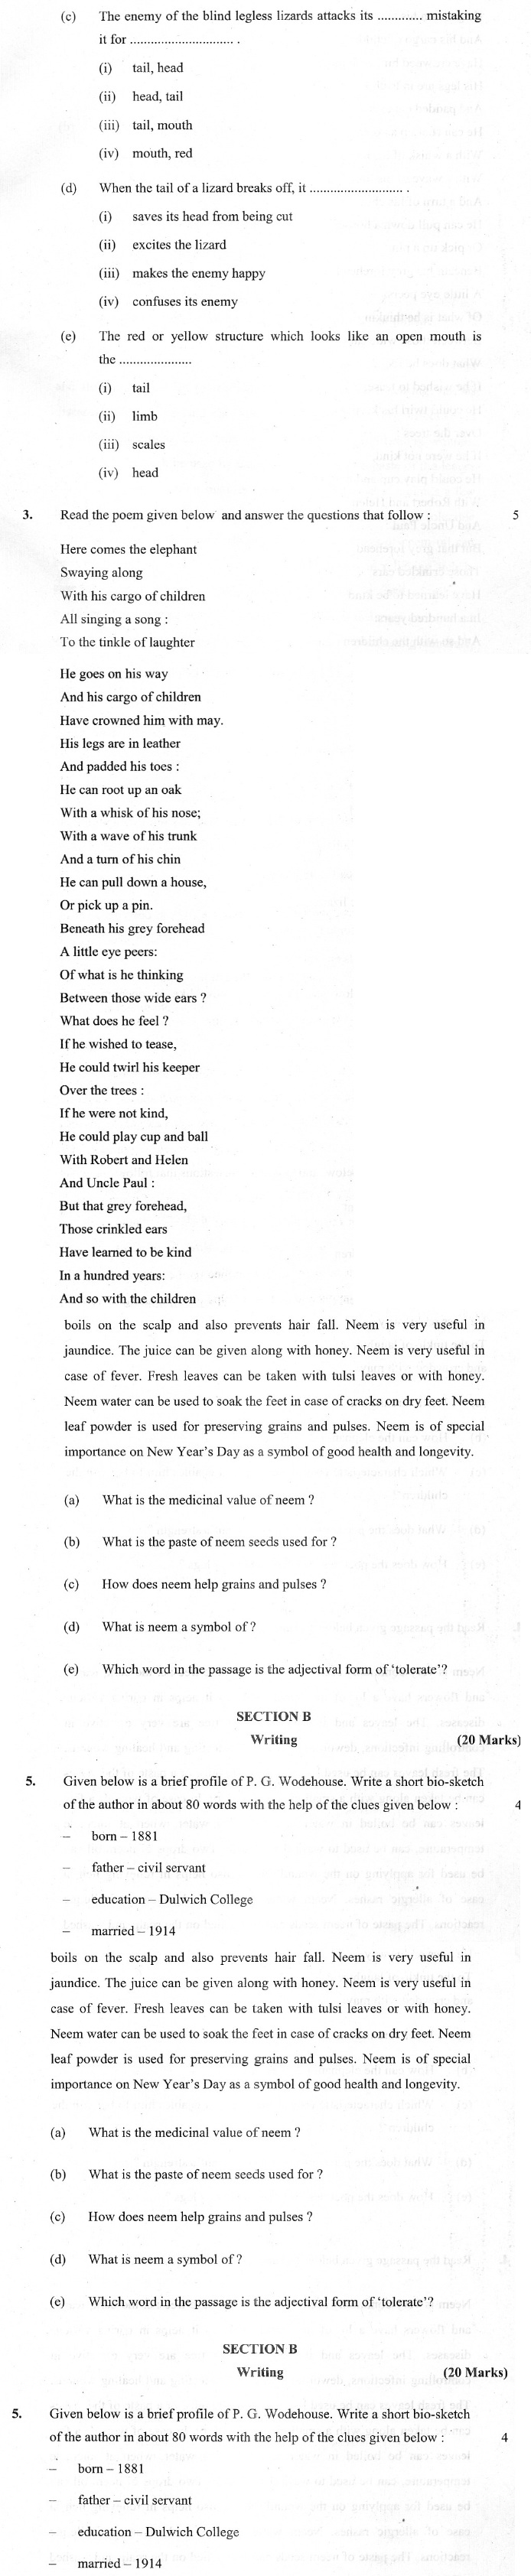 CBSE Class X Previous Year Question Papers 2012 English Communicative